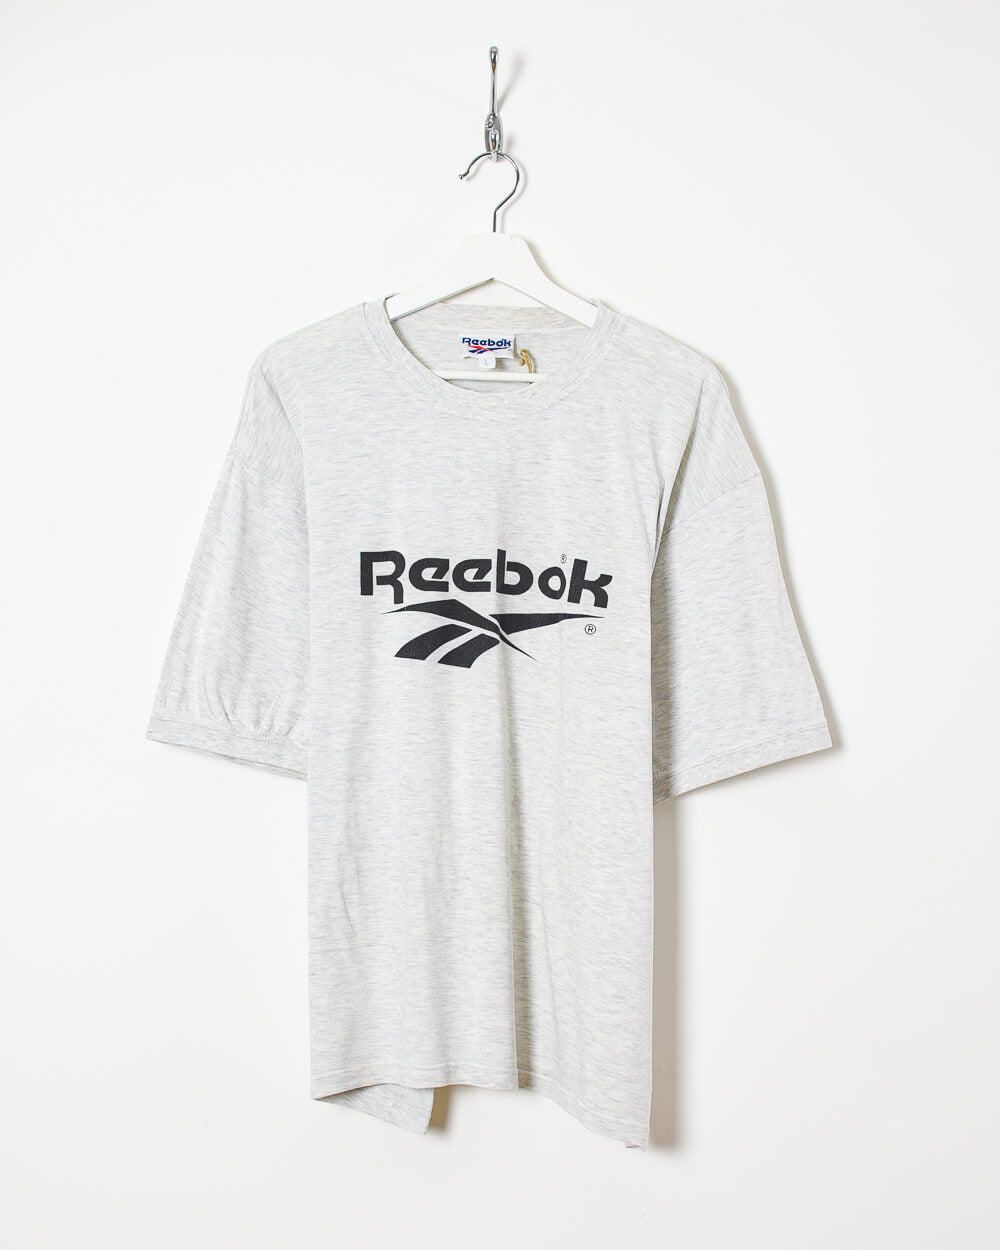 Reebok T-Shirt - X-Large - Domno Vintage 90s, 80s, 00s Retro and Vintage Clothing 